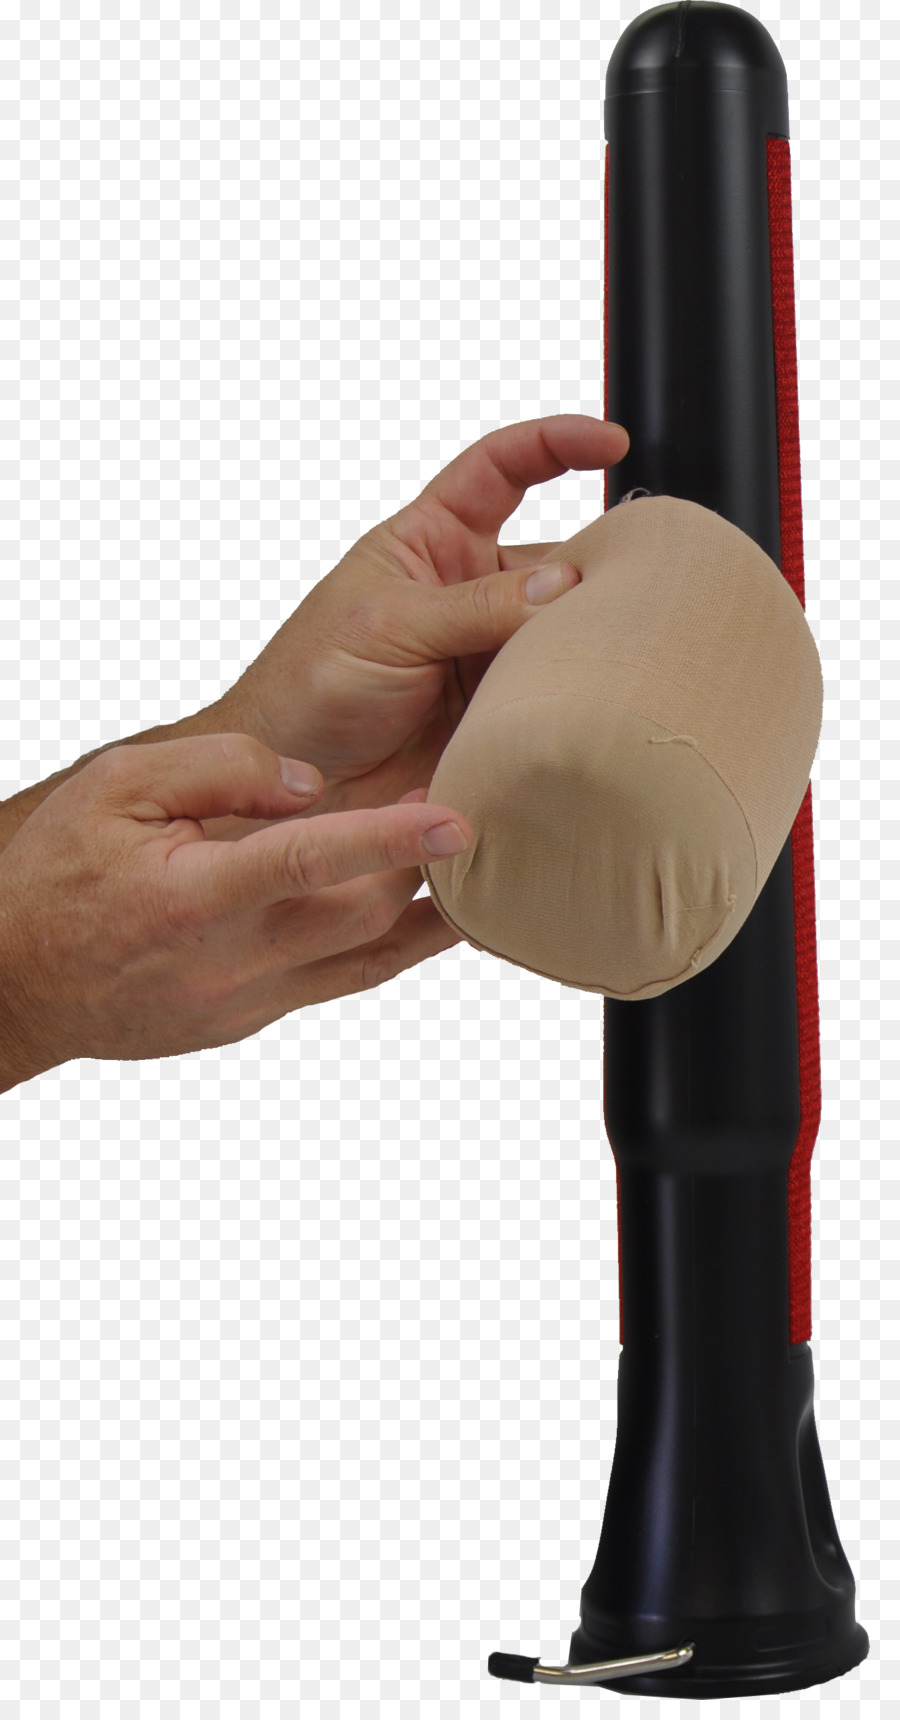 Compression Stockings Hand